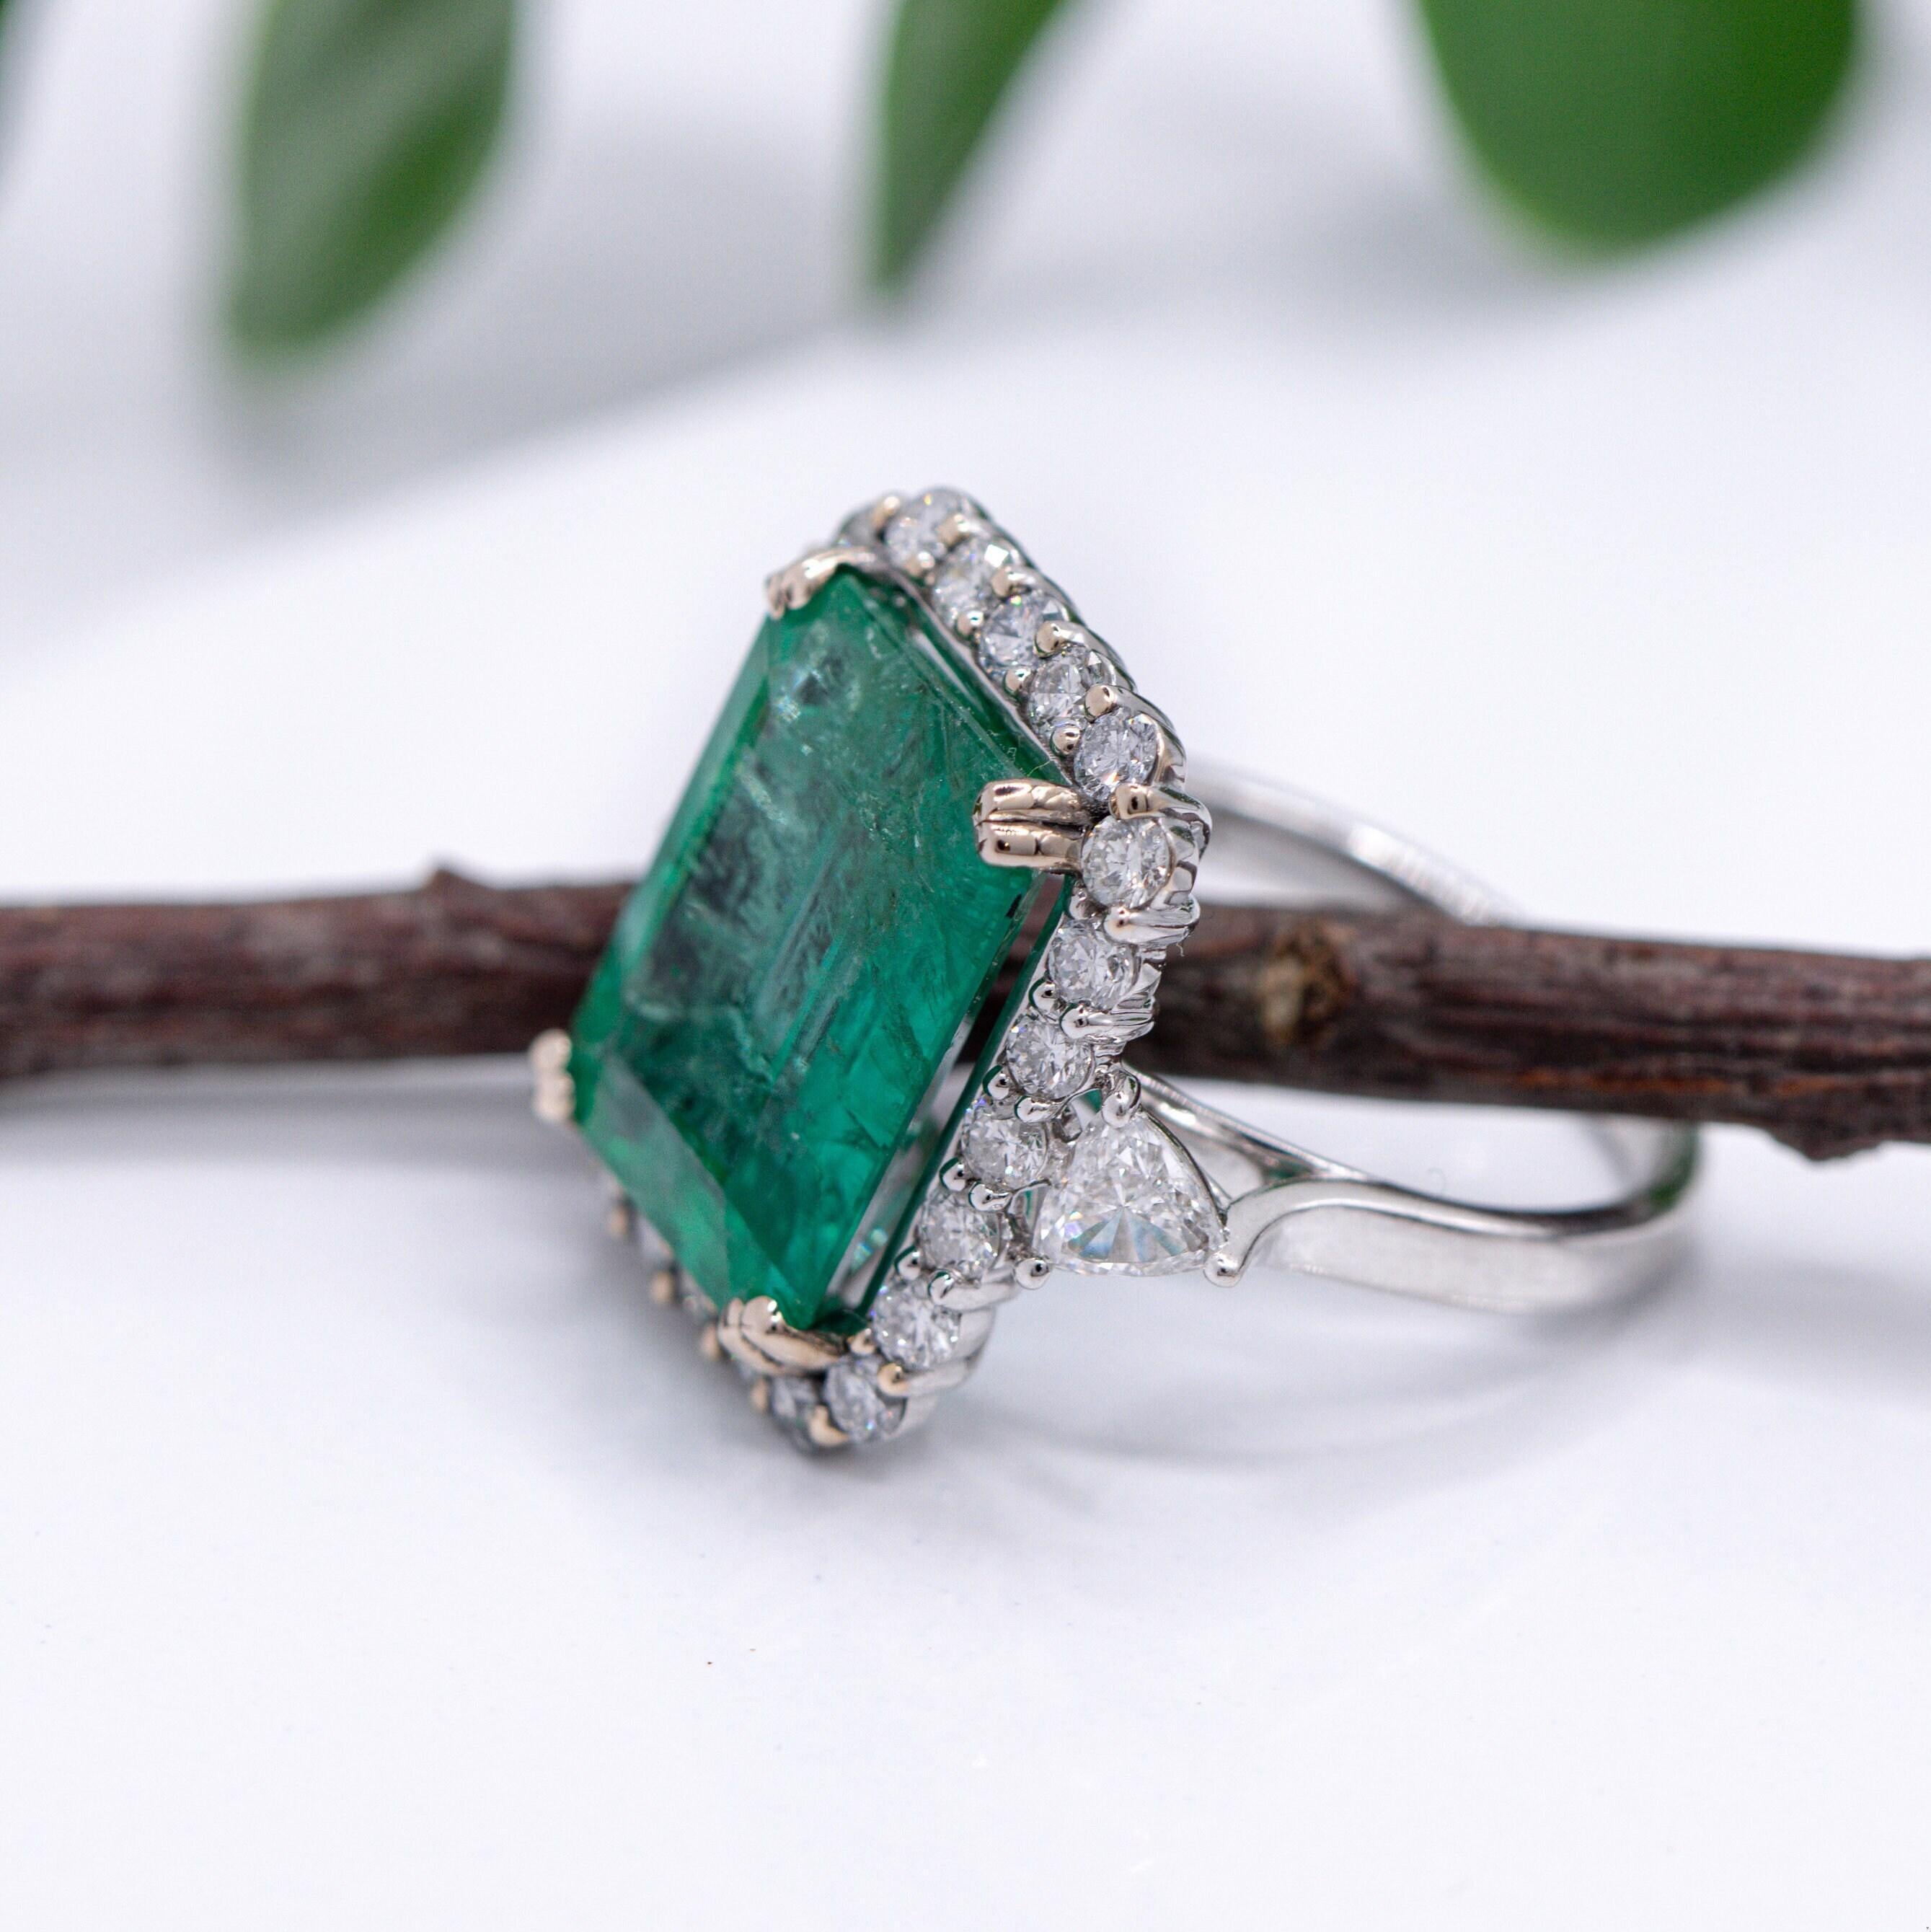 8ct Stunning Emerald Ring w Earth Mined Diamond in Solid 14K Gold EM 15x12mm For Sale 1